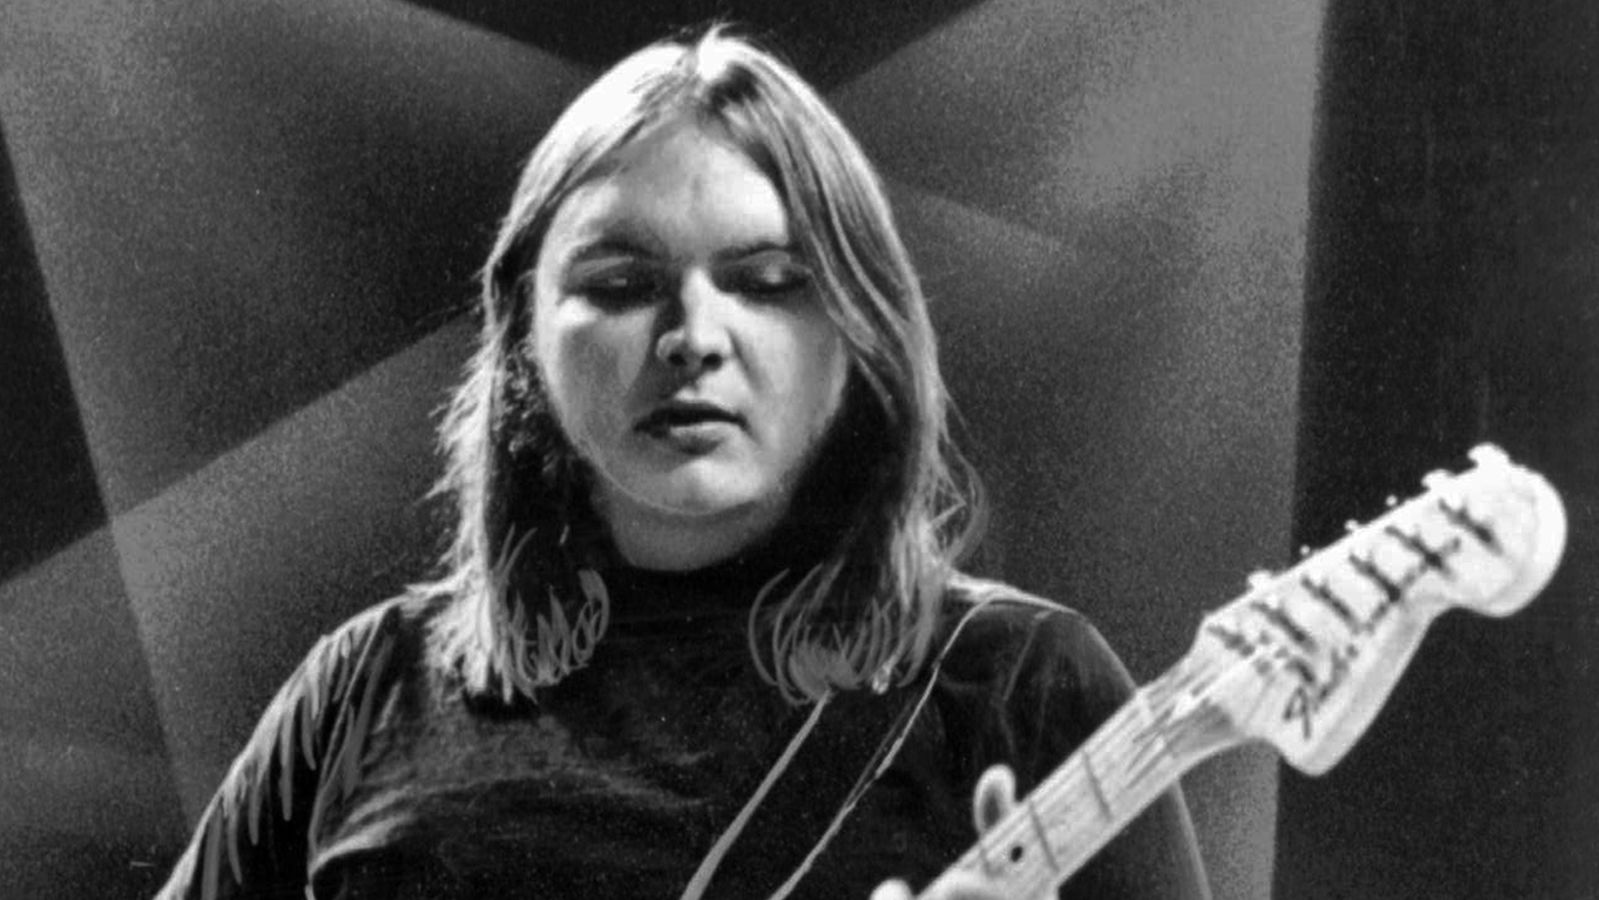 Ed King of the Southern rock band Lynyrd Skynyrd died Wednesday.